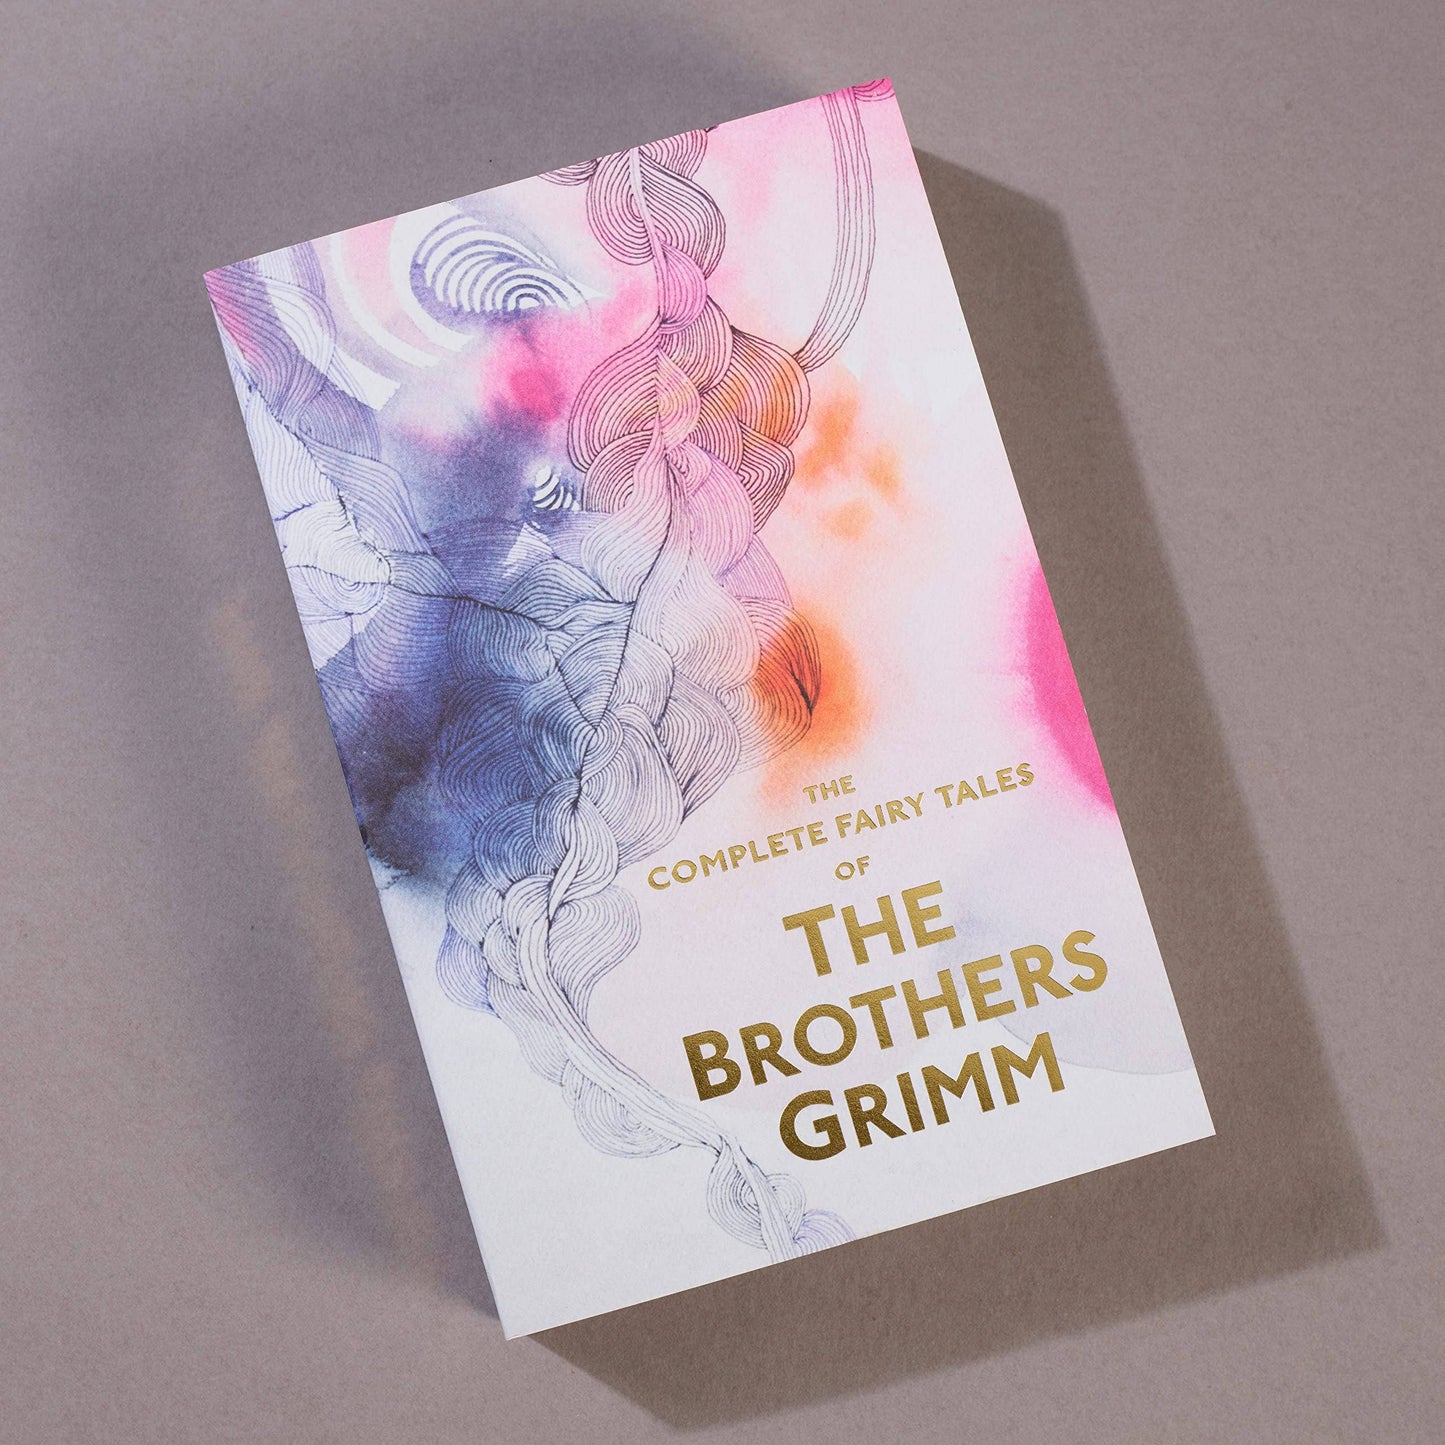 The Complete Fairy Tales of The Brothers Grimm | Special Ed.